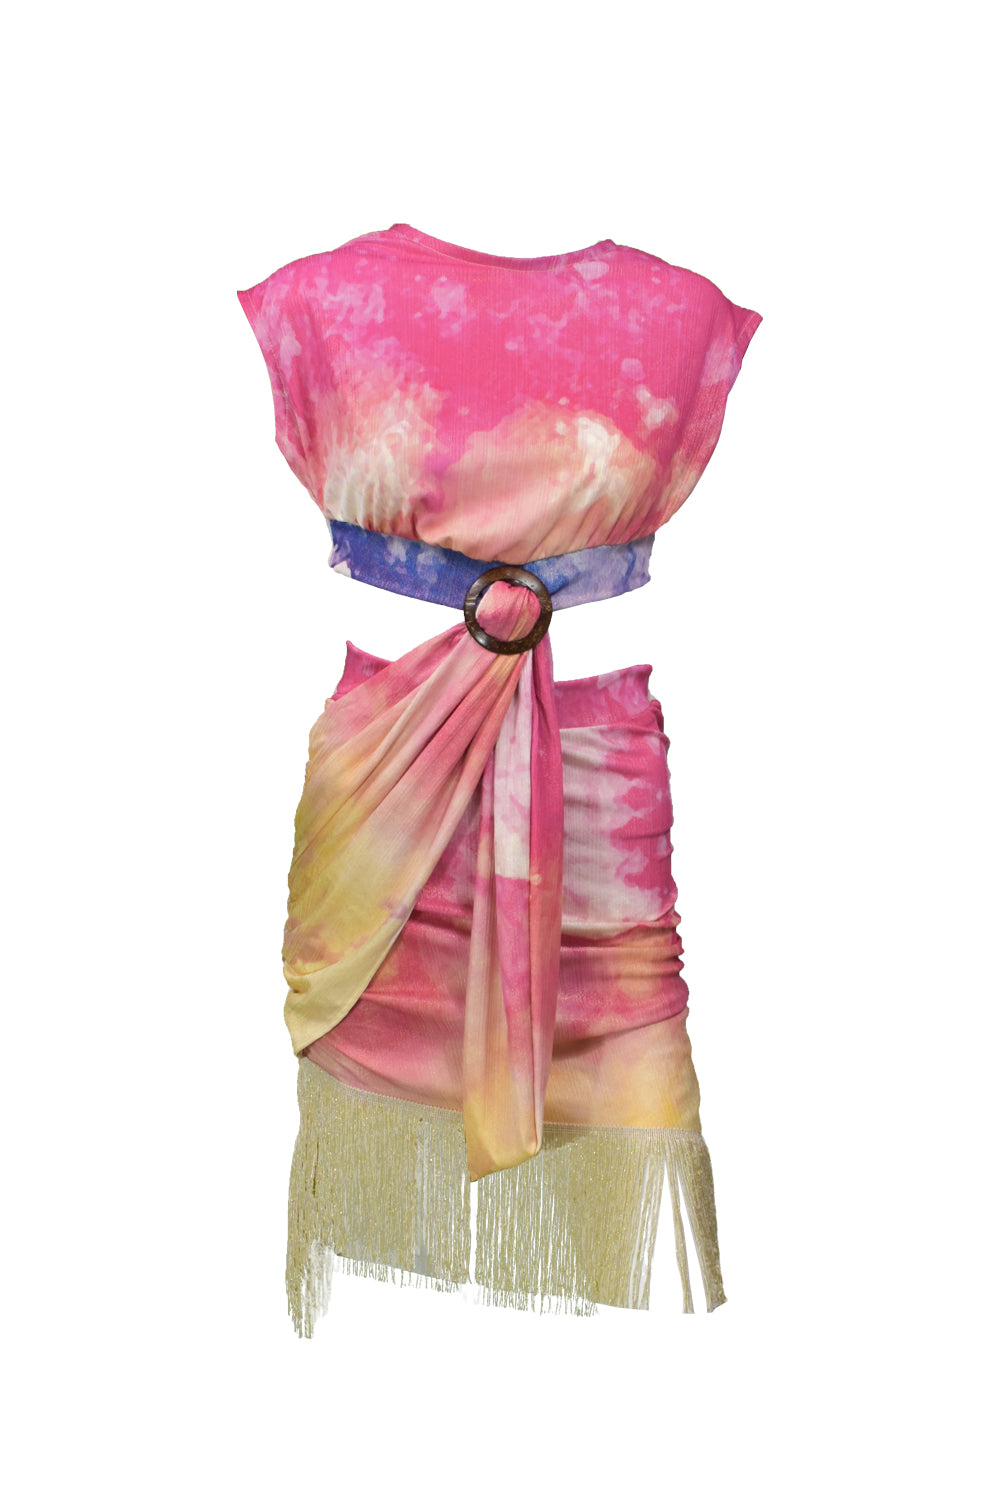 Image of the front of the Atardecer Flecos Dress.